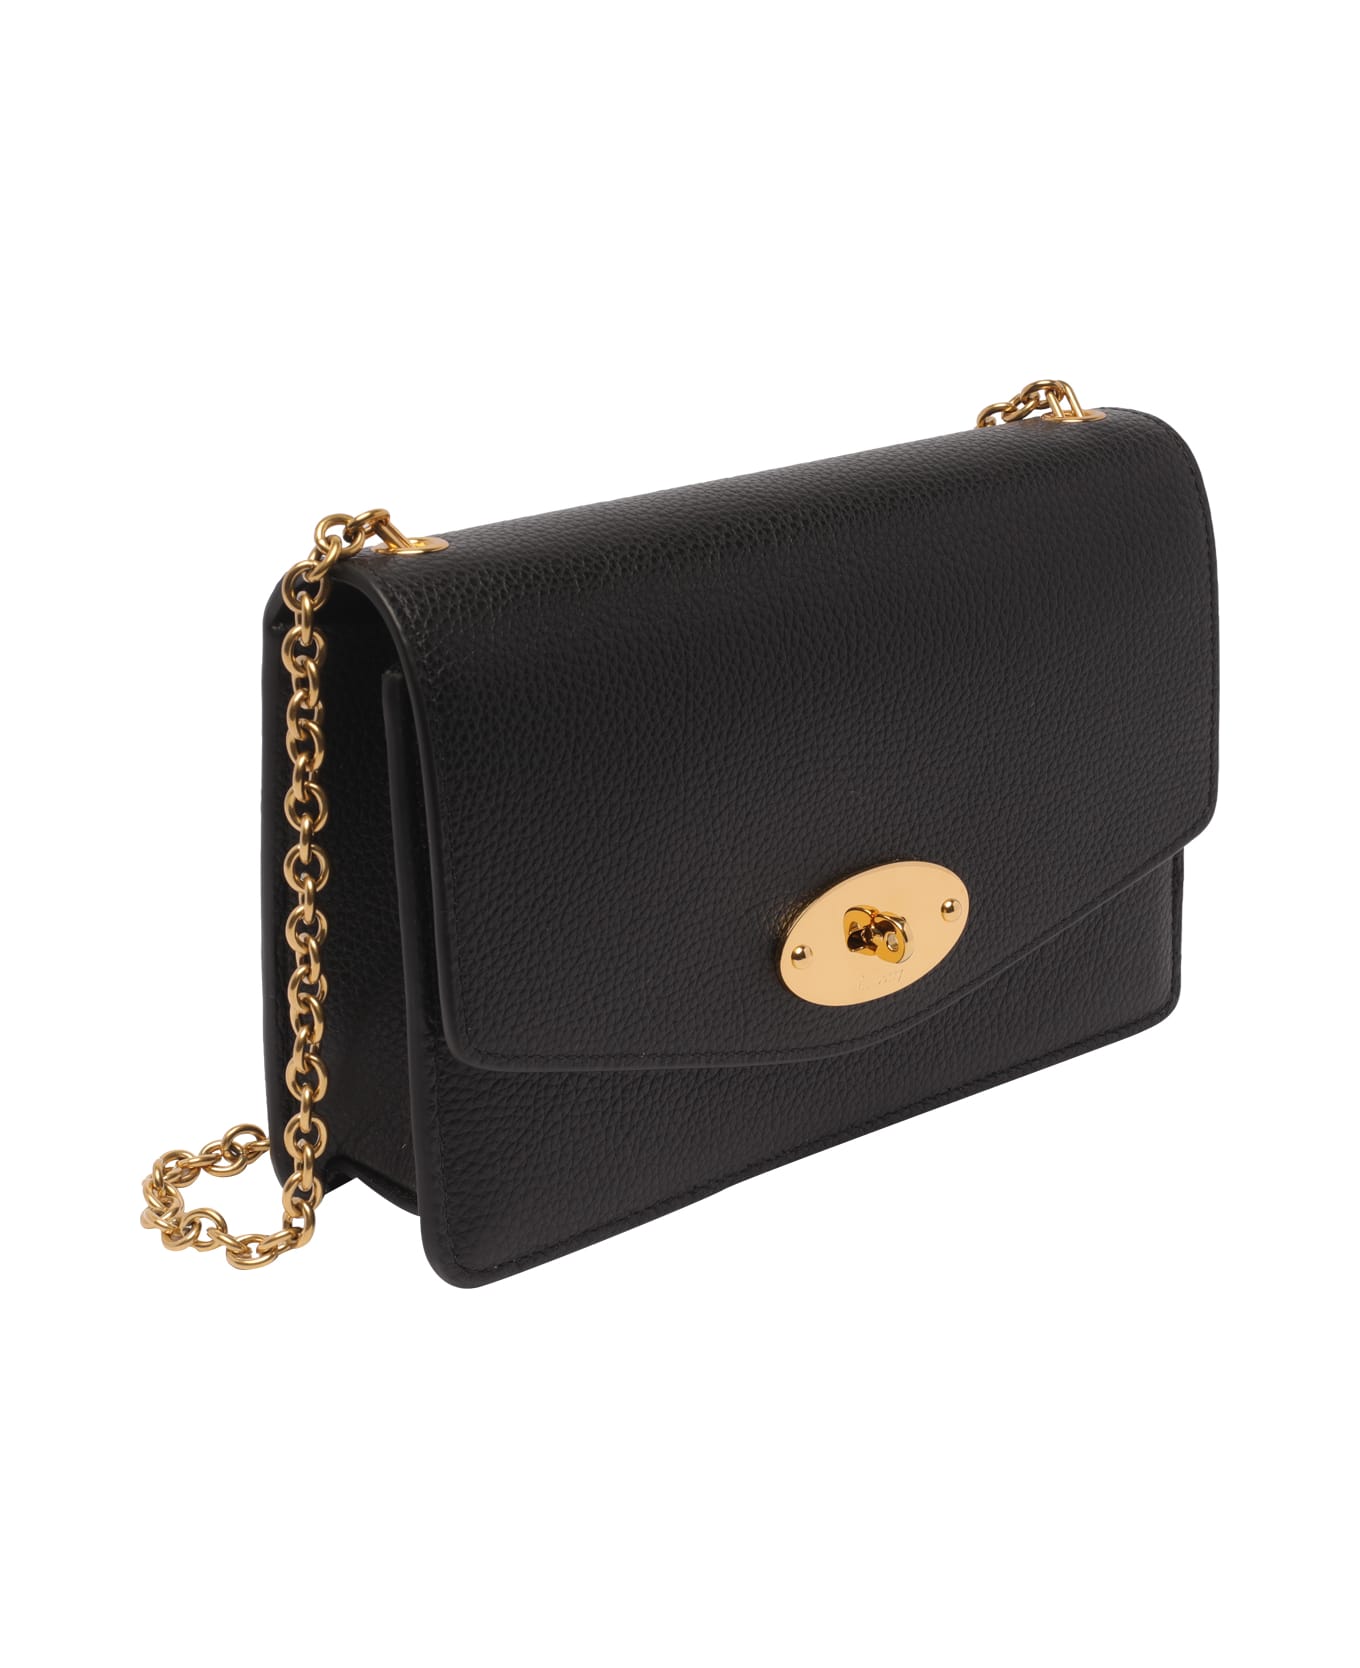 Mulberry Darley Classic Small Shoulder Bag - Black